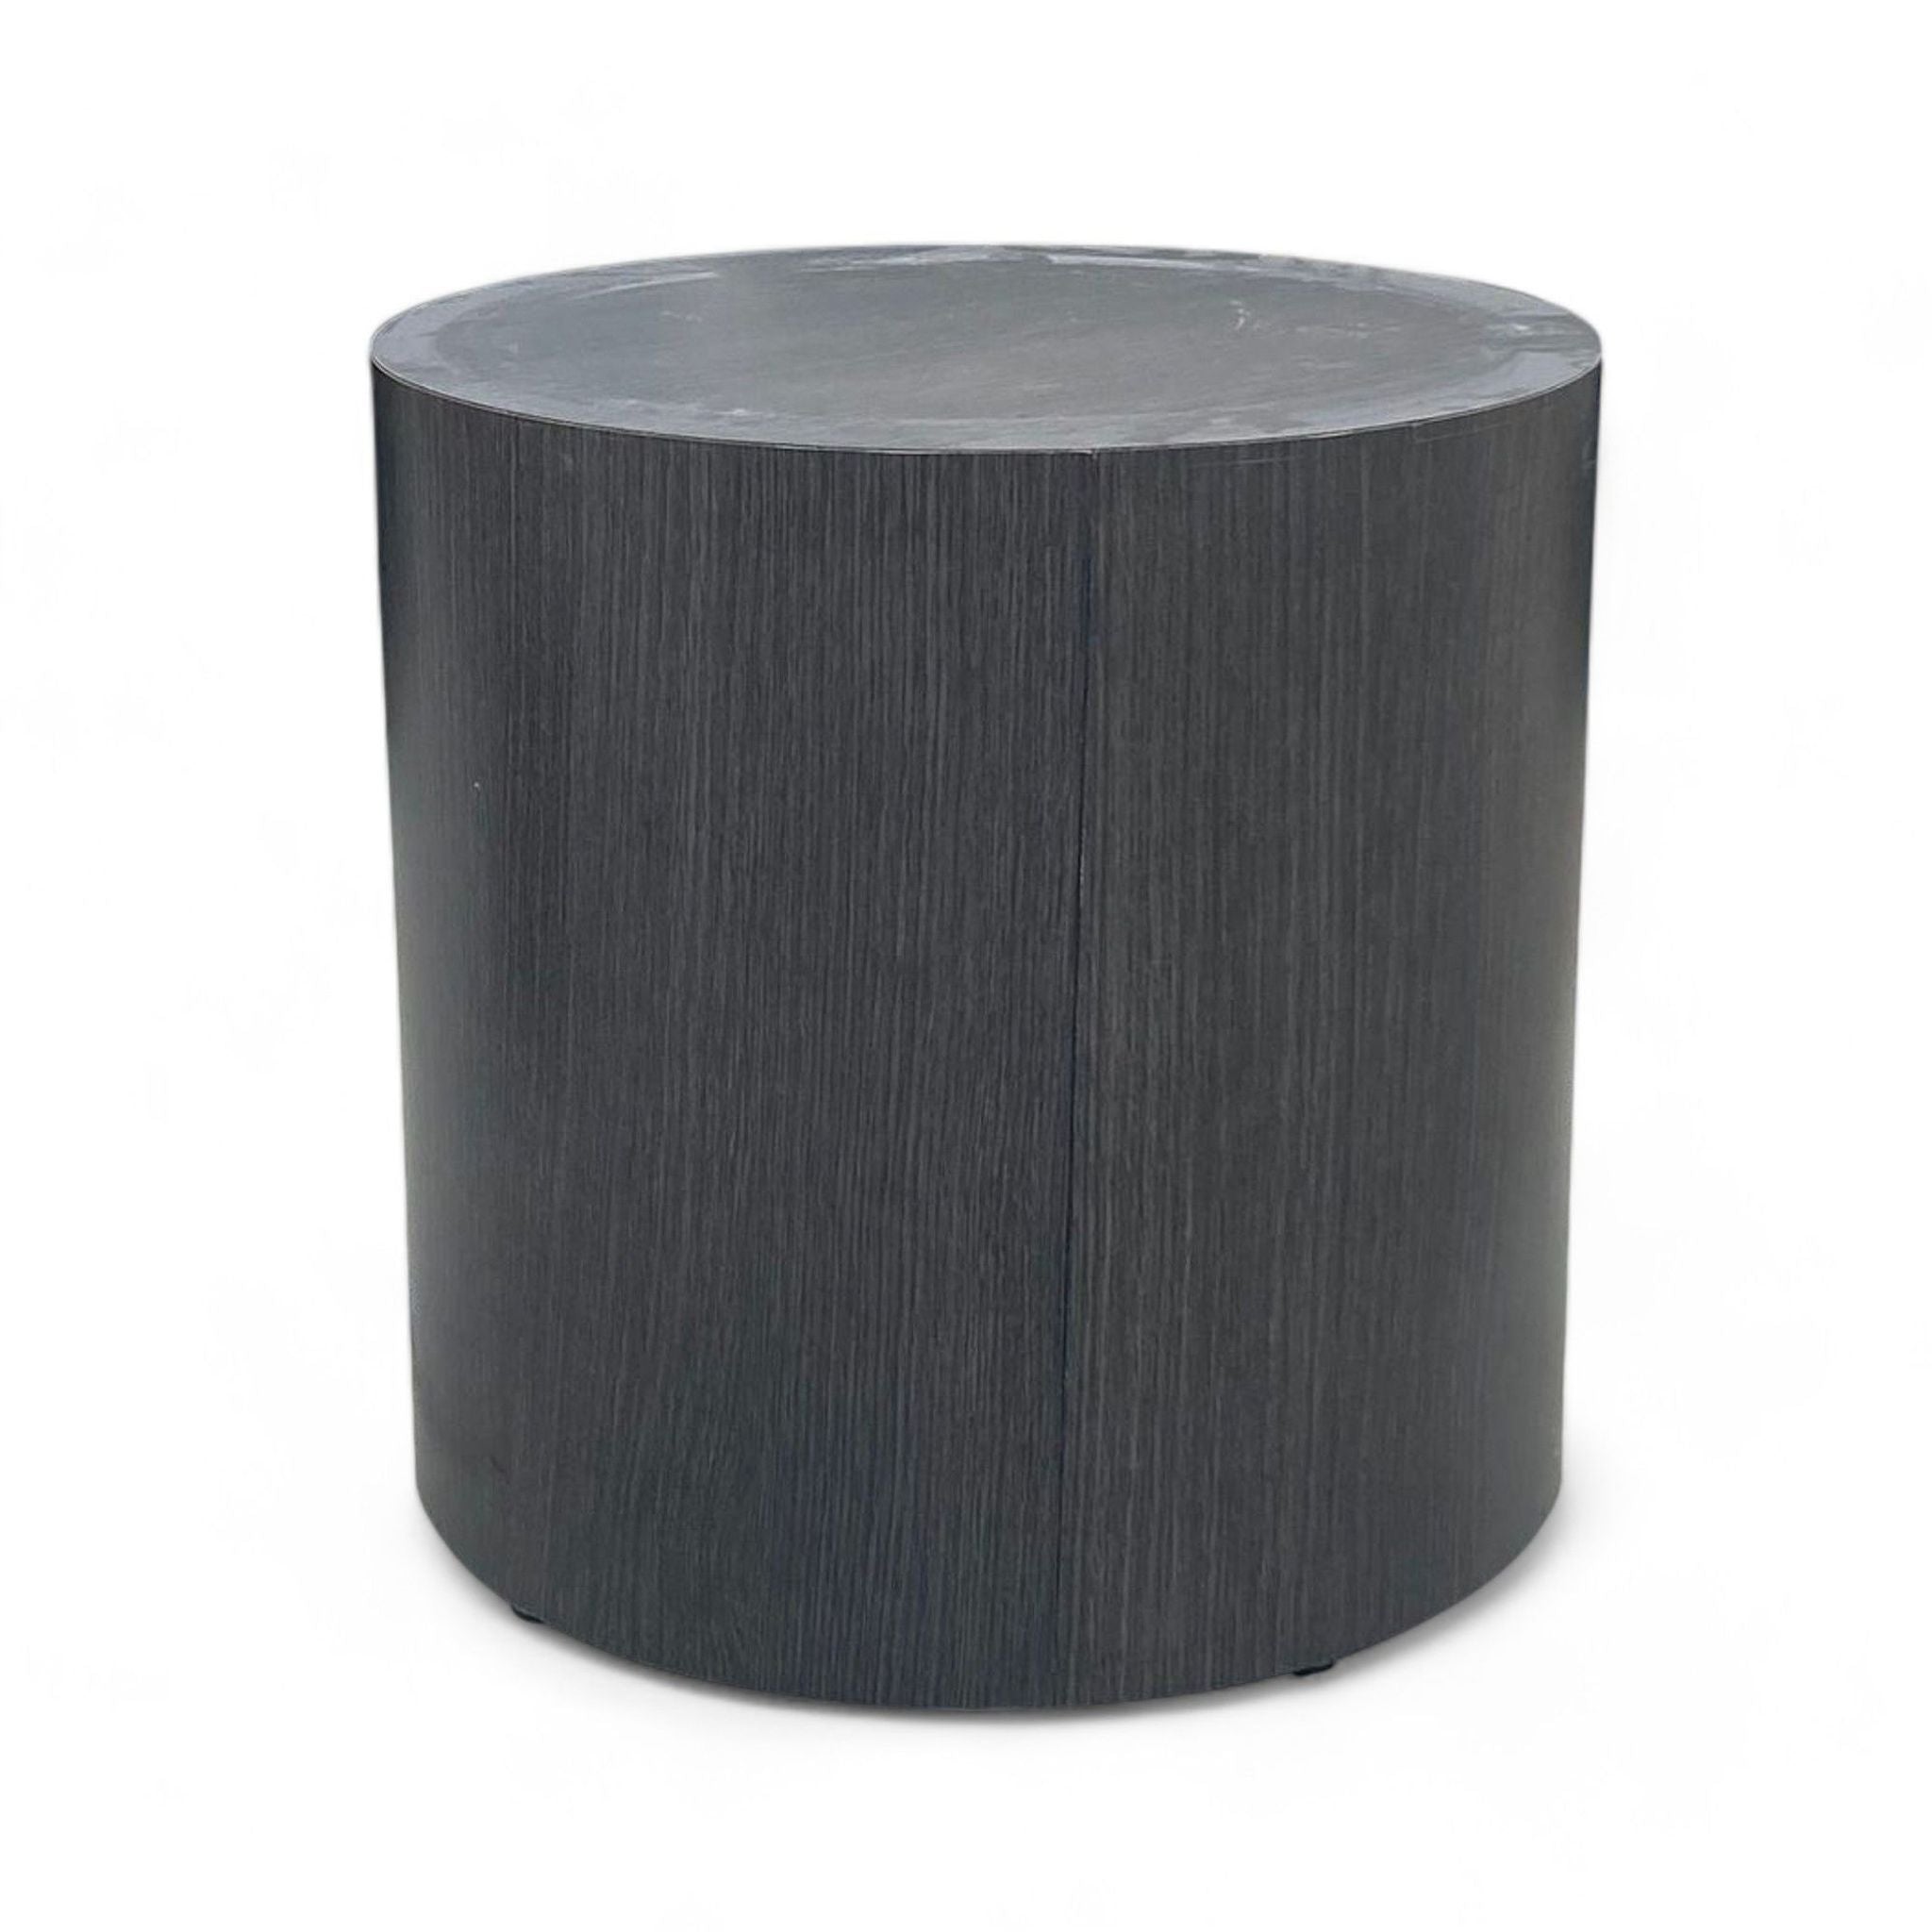 1. Reperch brand modern side table in a dark gray finish, cylindrical shape with a smooth surface, against a white background.